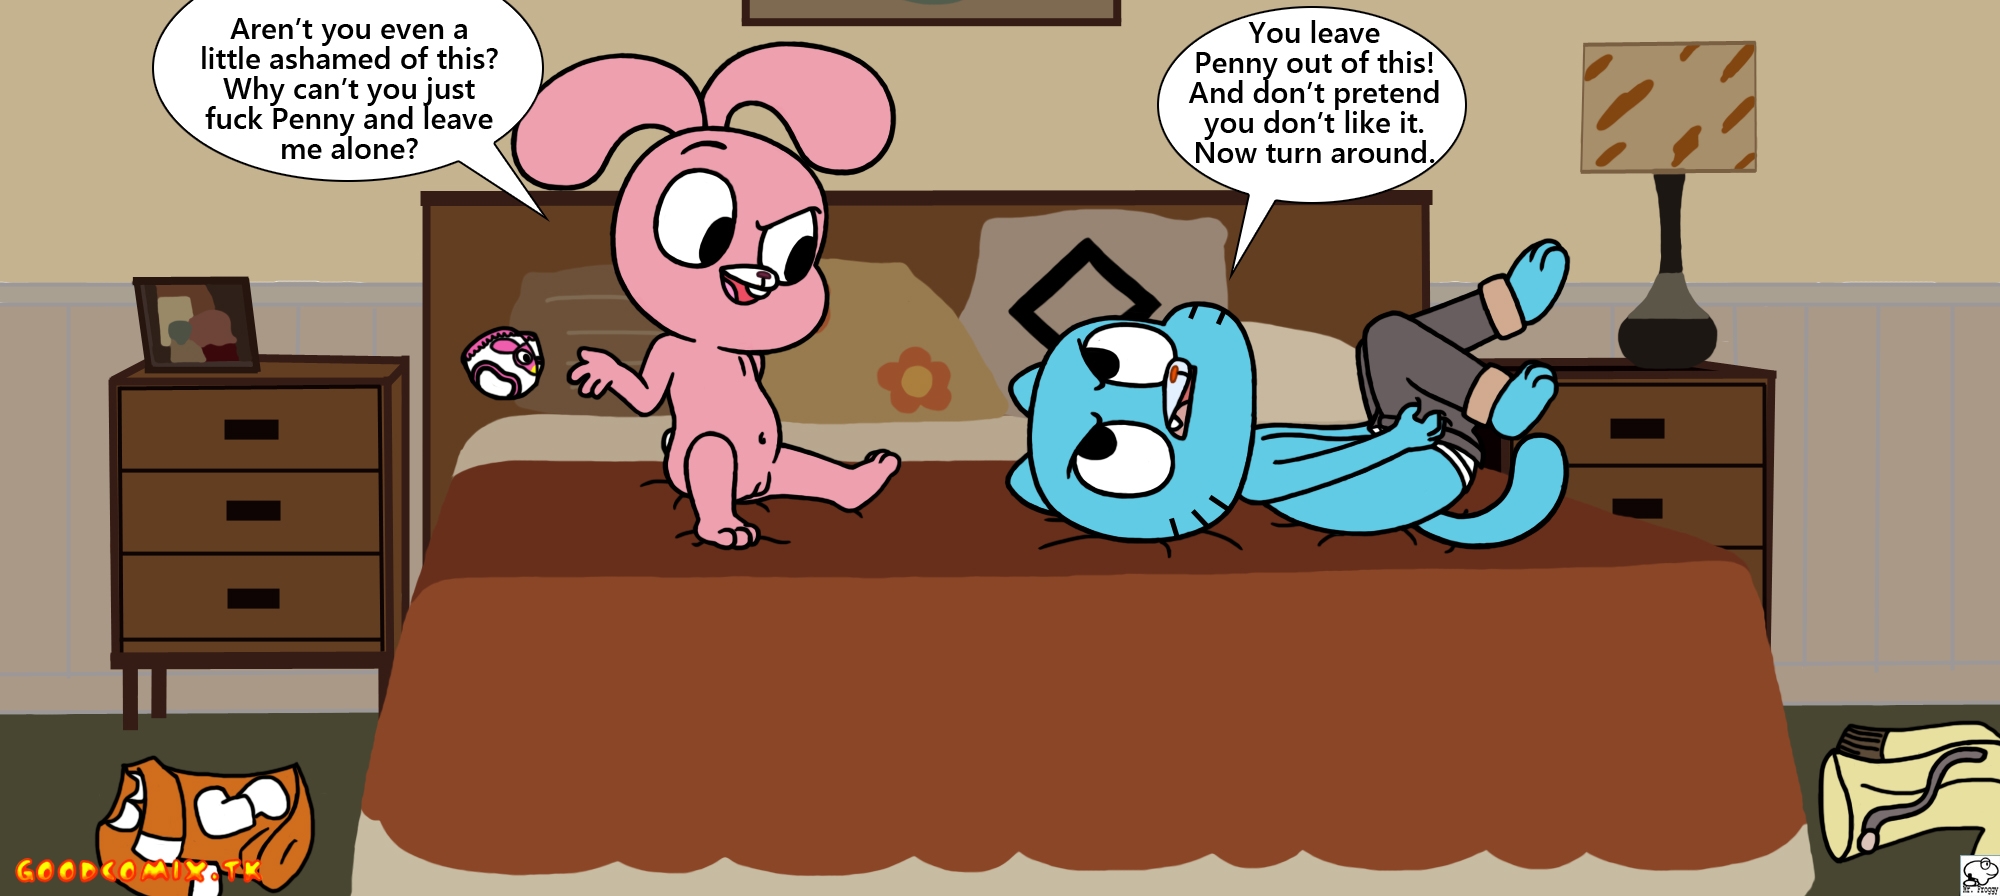 Amazing World Of Gumball Penny Porn - Matchless amazing world of gumball family join. All - Nude pic